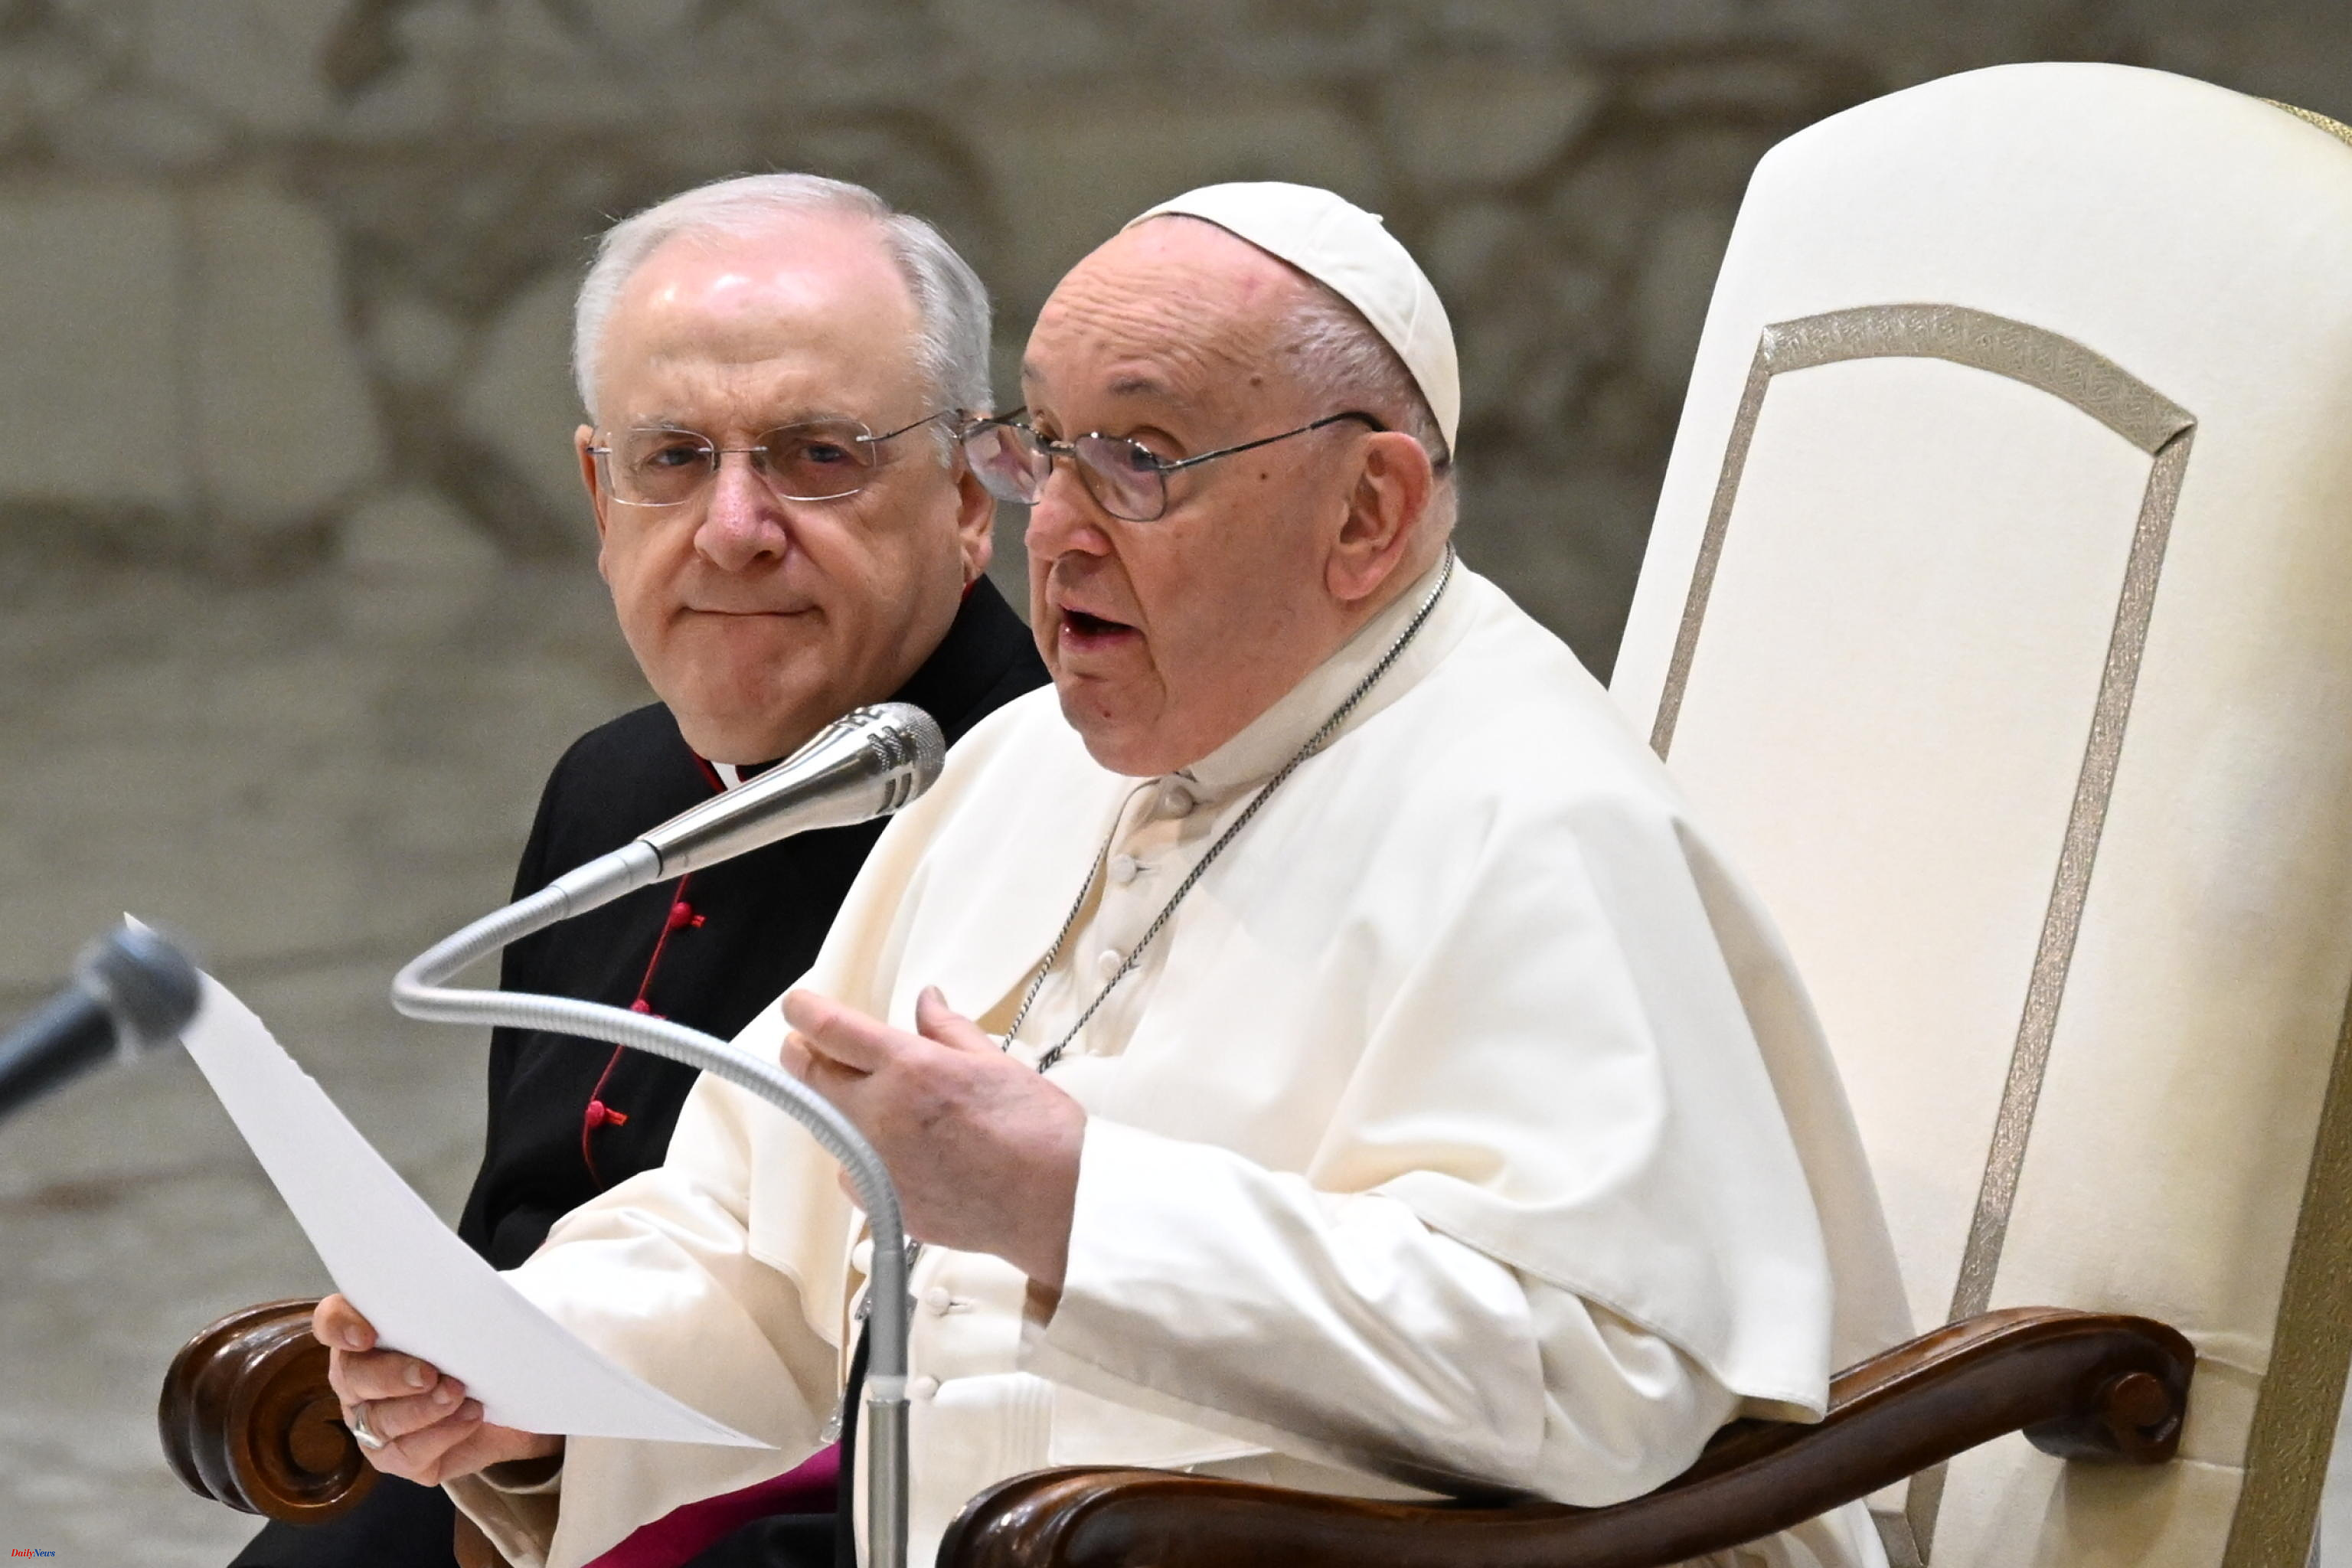 Catholic Church The Pope alleges that the blessings to homosexual couples are directed "to the people"